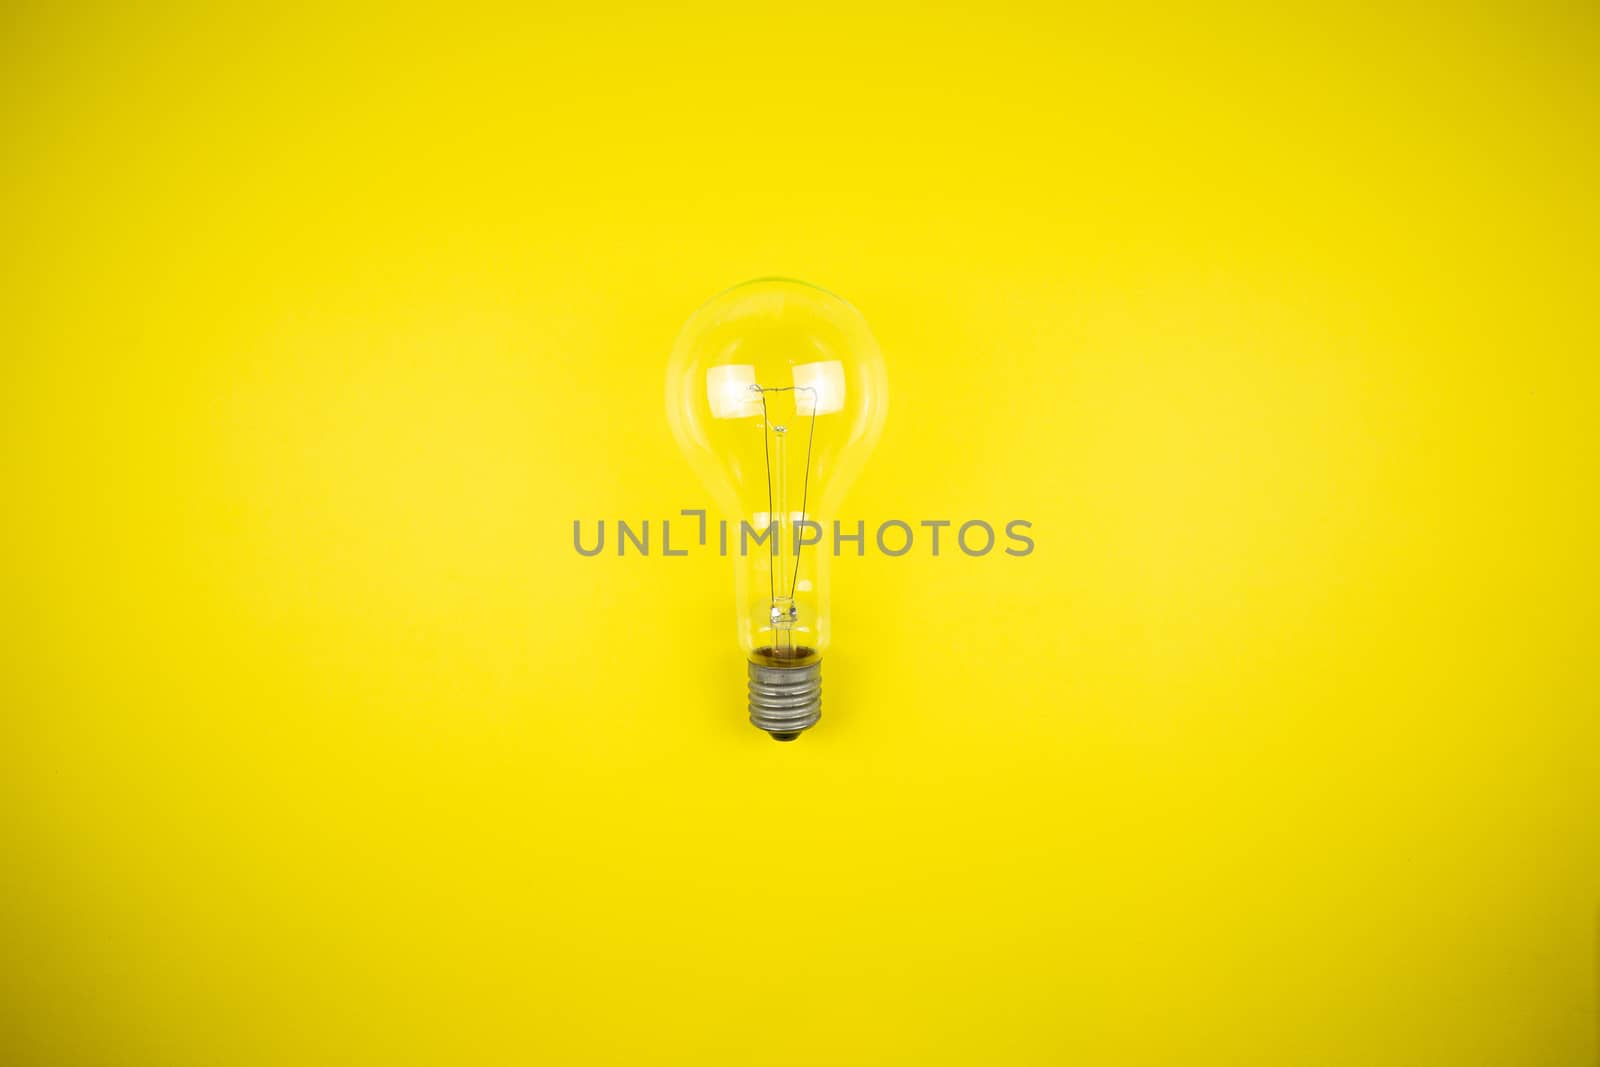 An idea came up. Light bulb on a yellow background by Grinchenkophoto